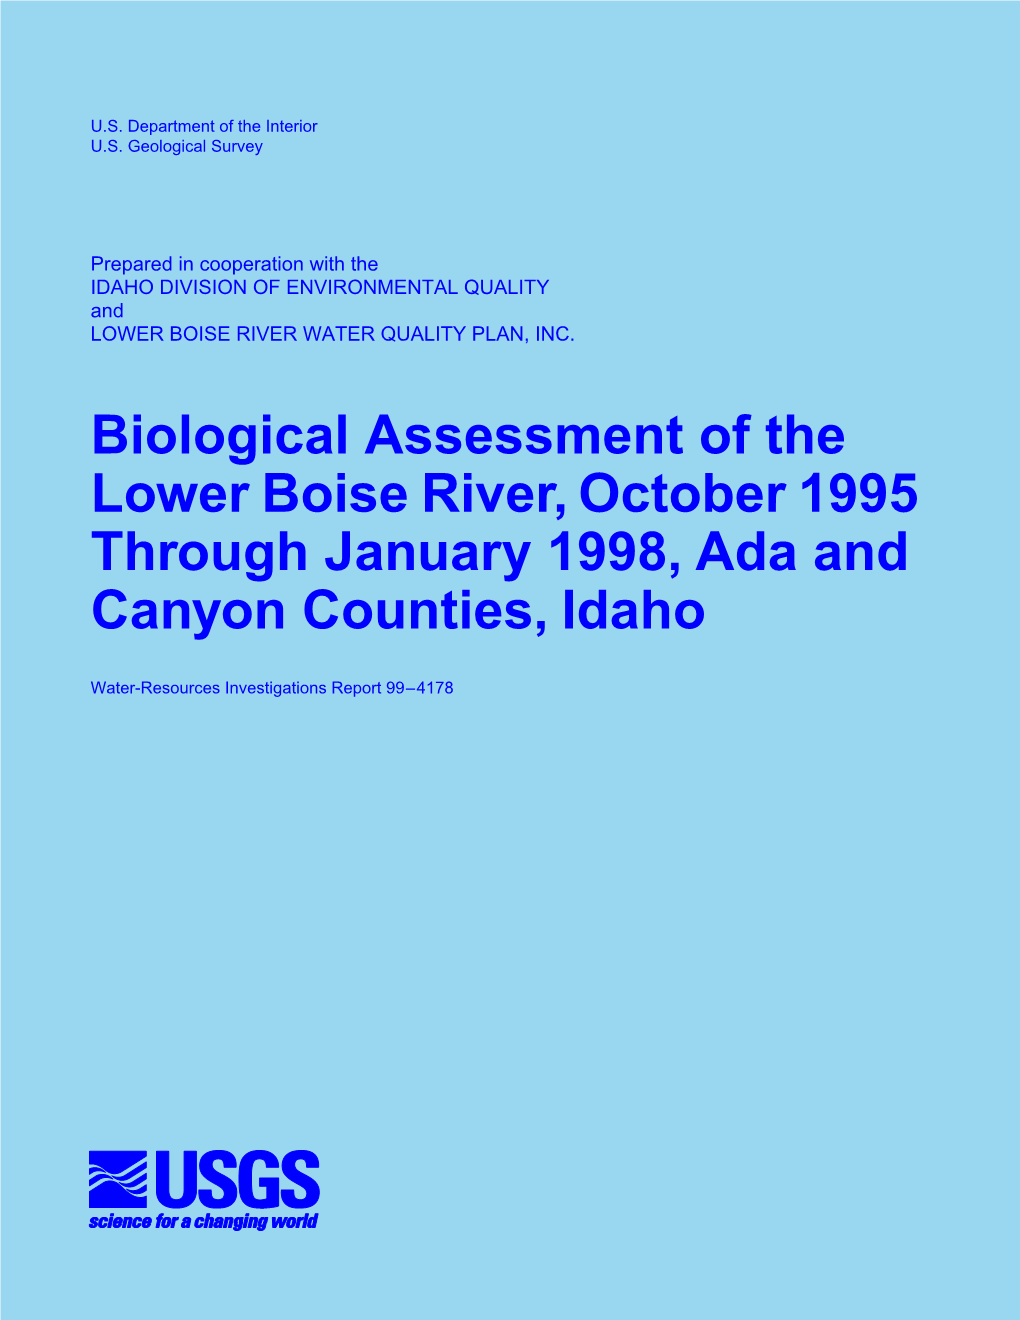 Biological Assessment of the Lower Boise River, October 1995 Through January 1998, Ada and Canyon Counties, Idaho